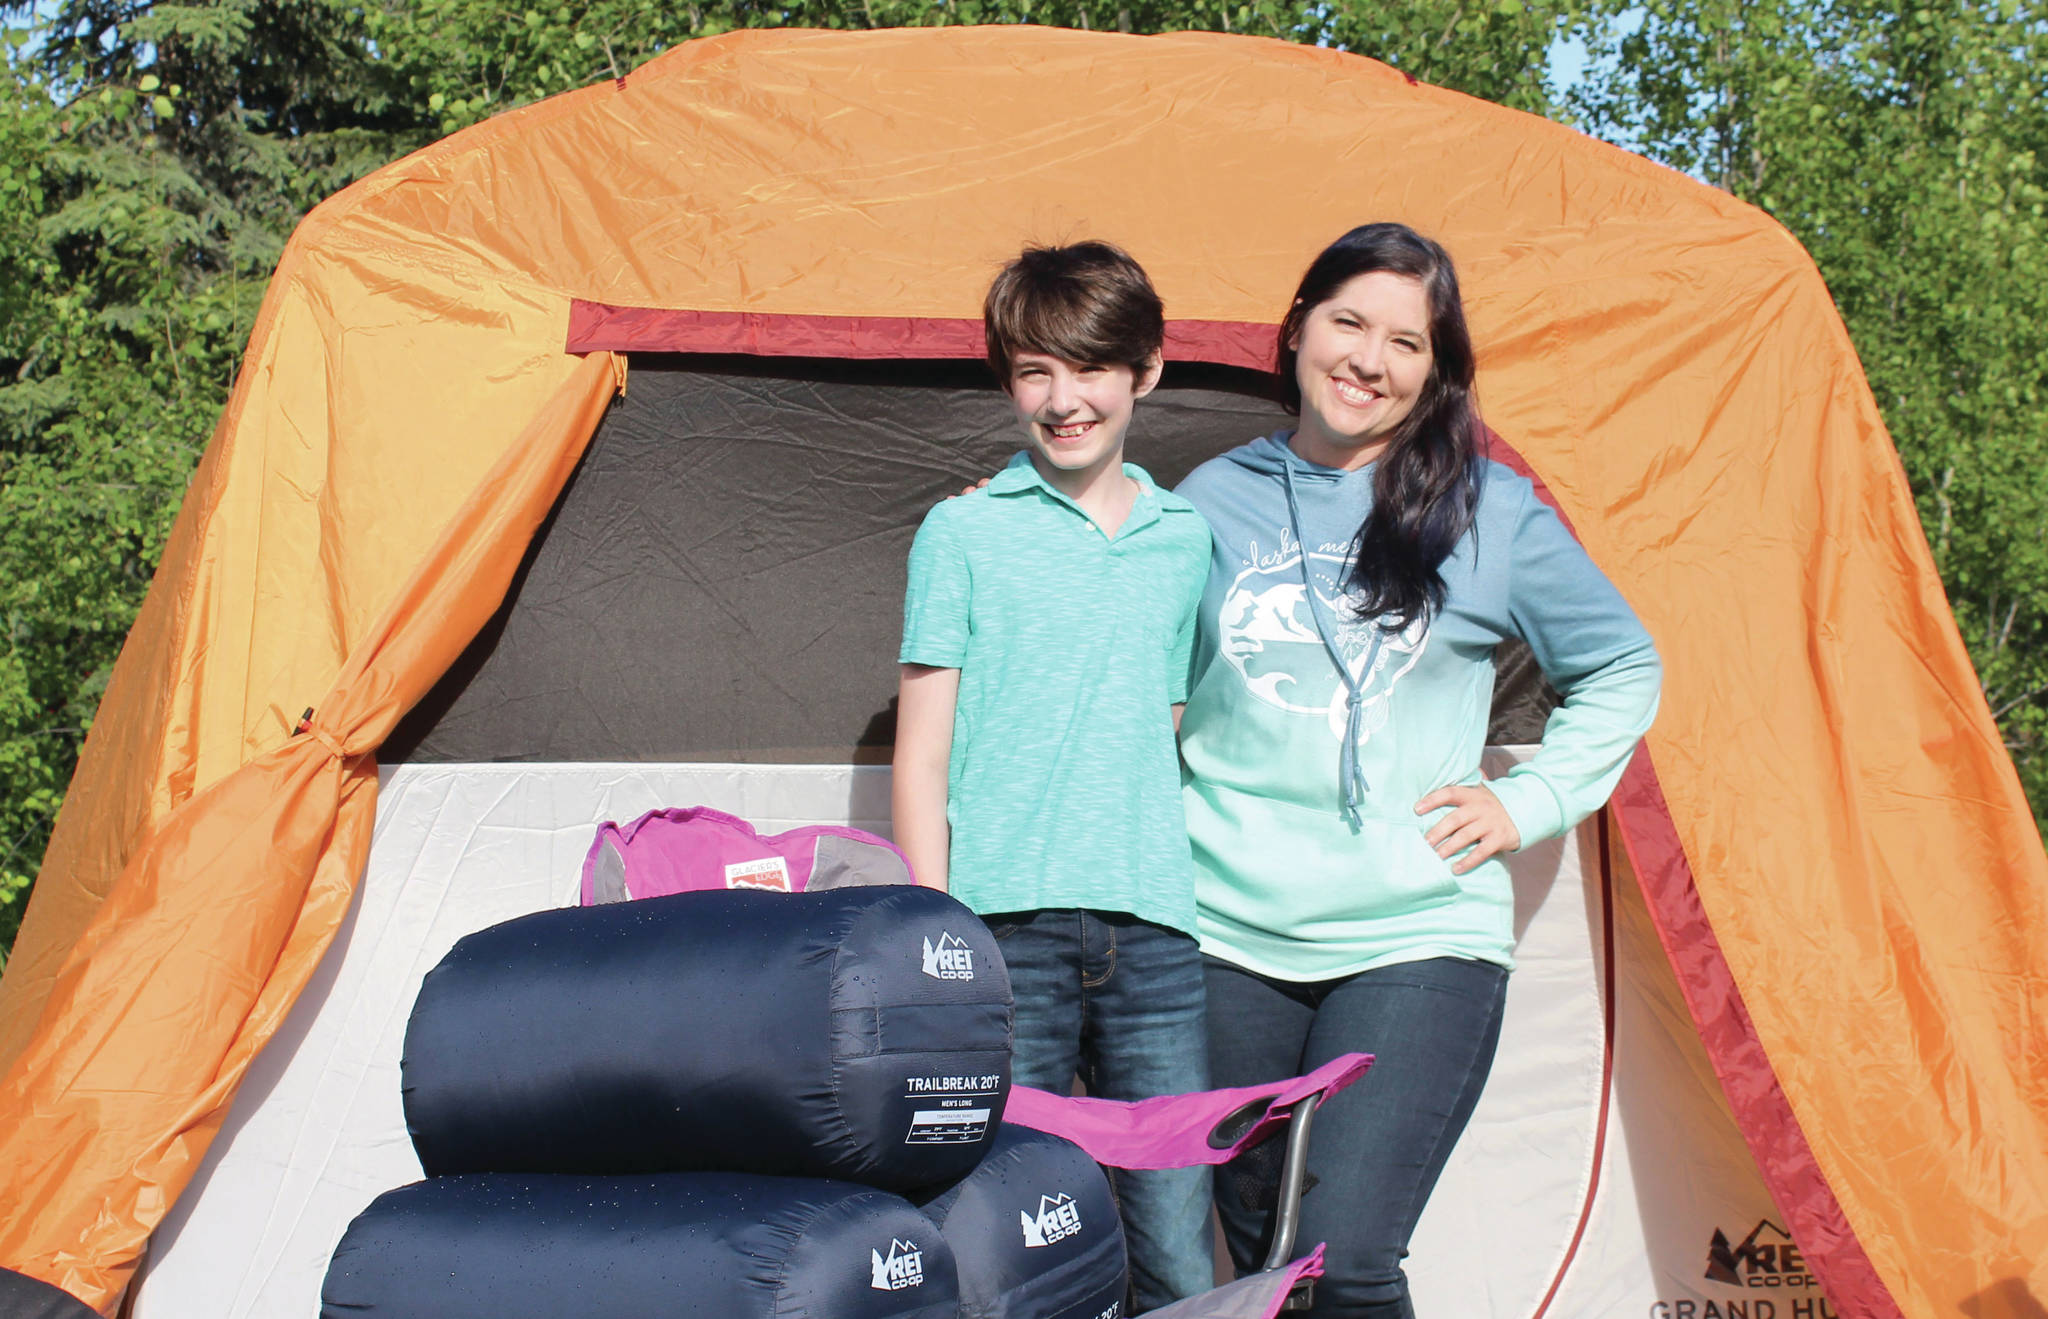 Ashlyn O’Hara / Peninsula Clarion 
Koebryn and Summer Lazenby stand in front of camping gear Tuesday at Summer’s house near Soldotna.